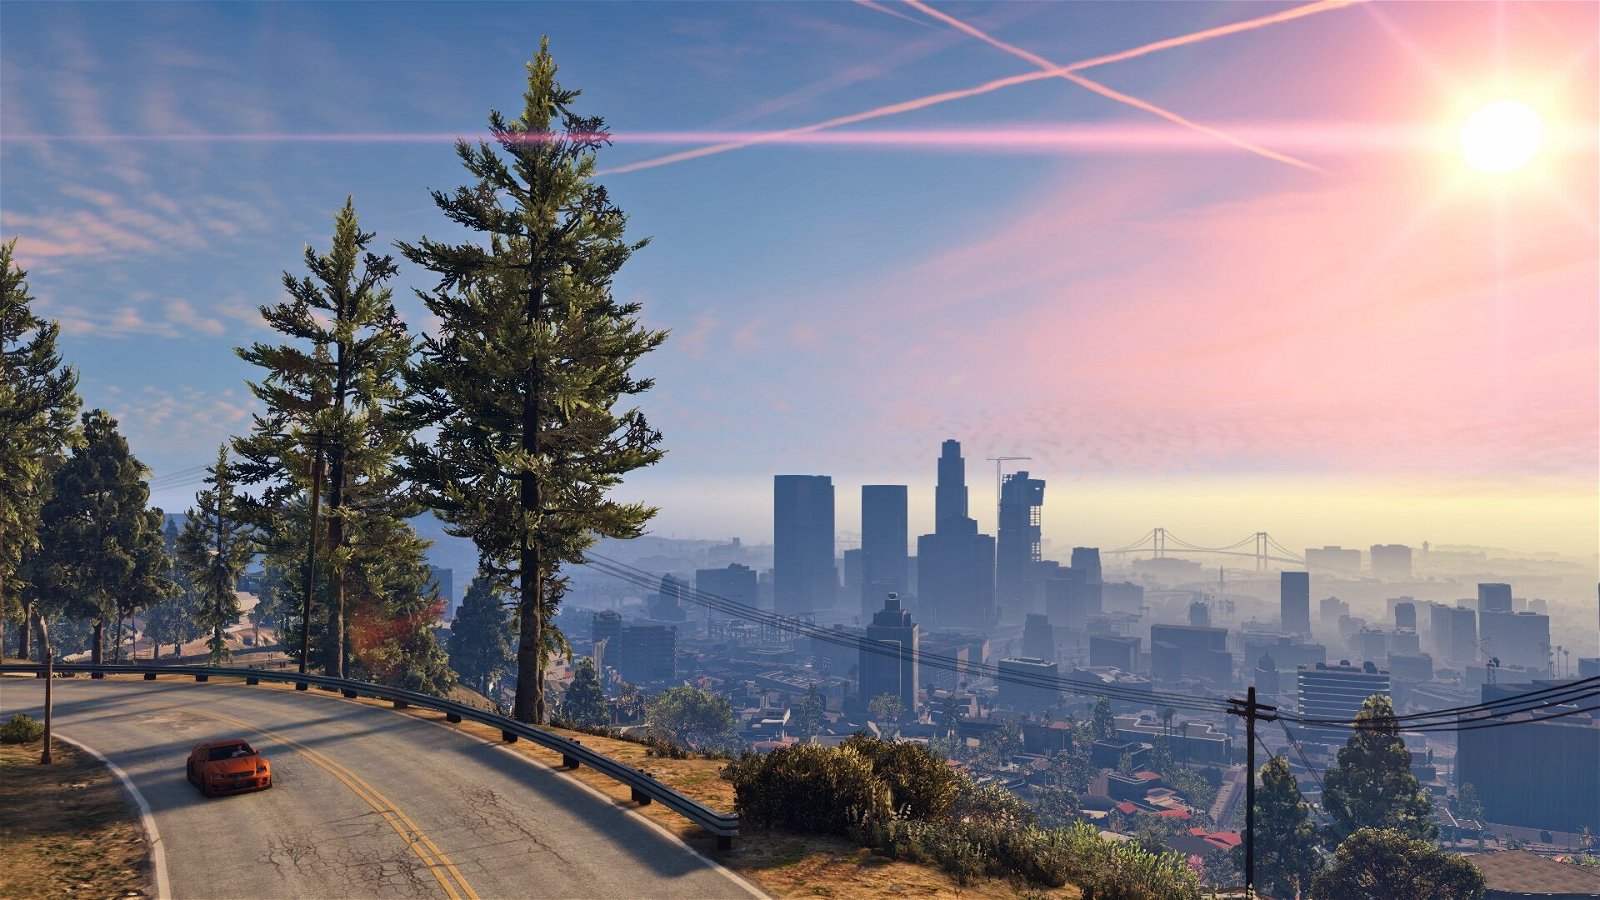 How To Continue Playing Gta Online On Pc Safely, Post-Breach  2